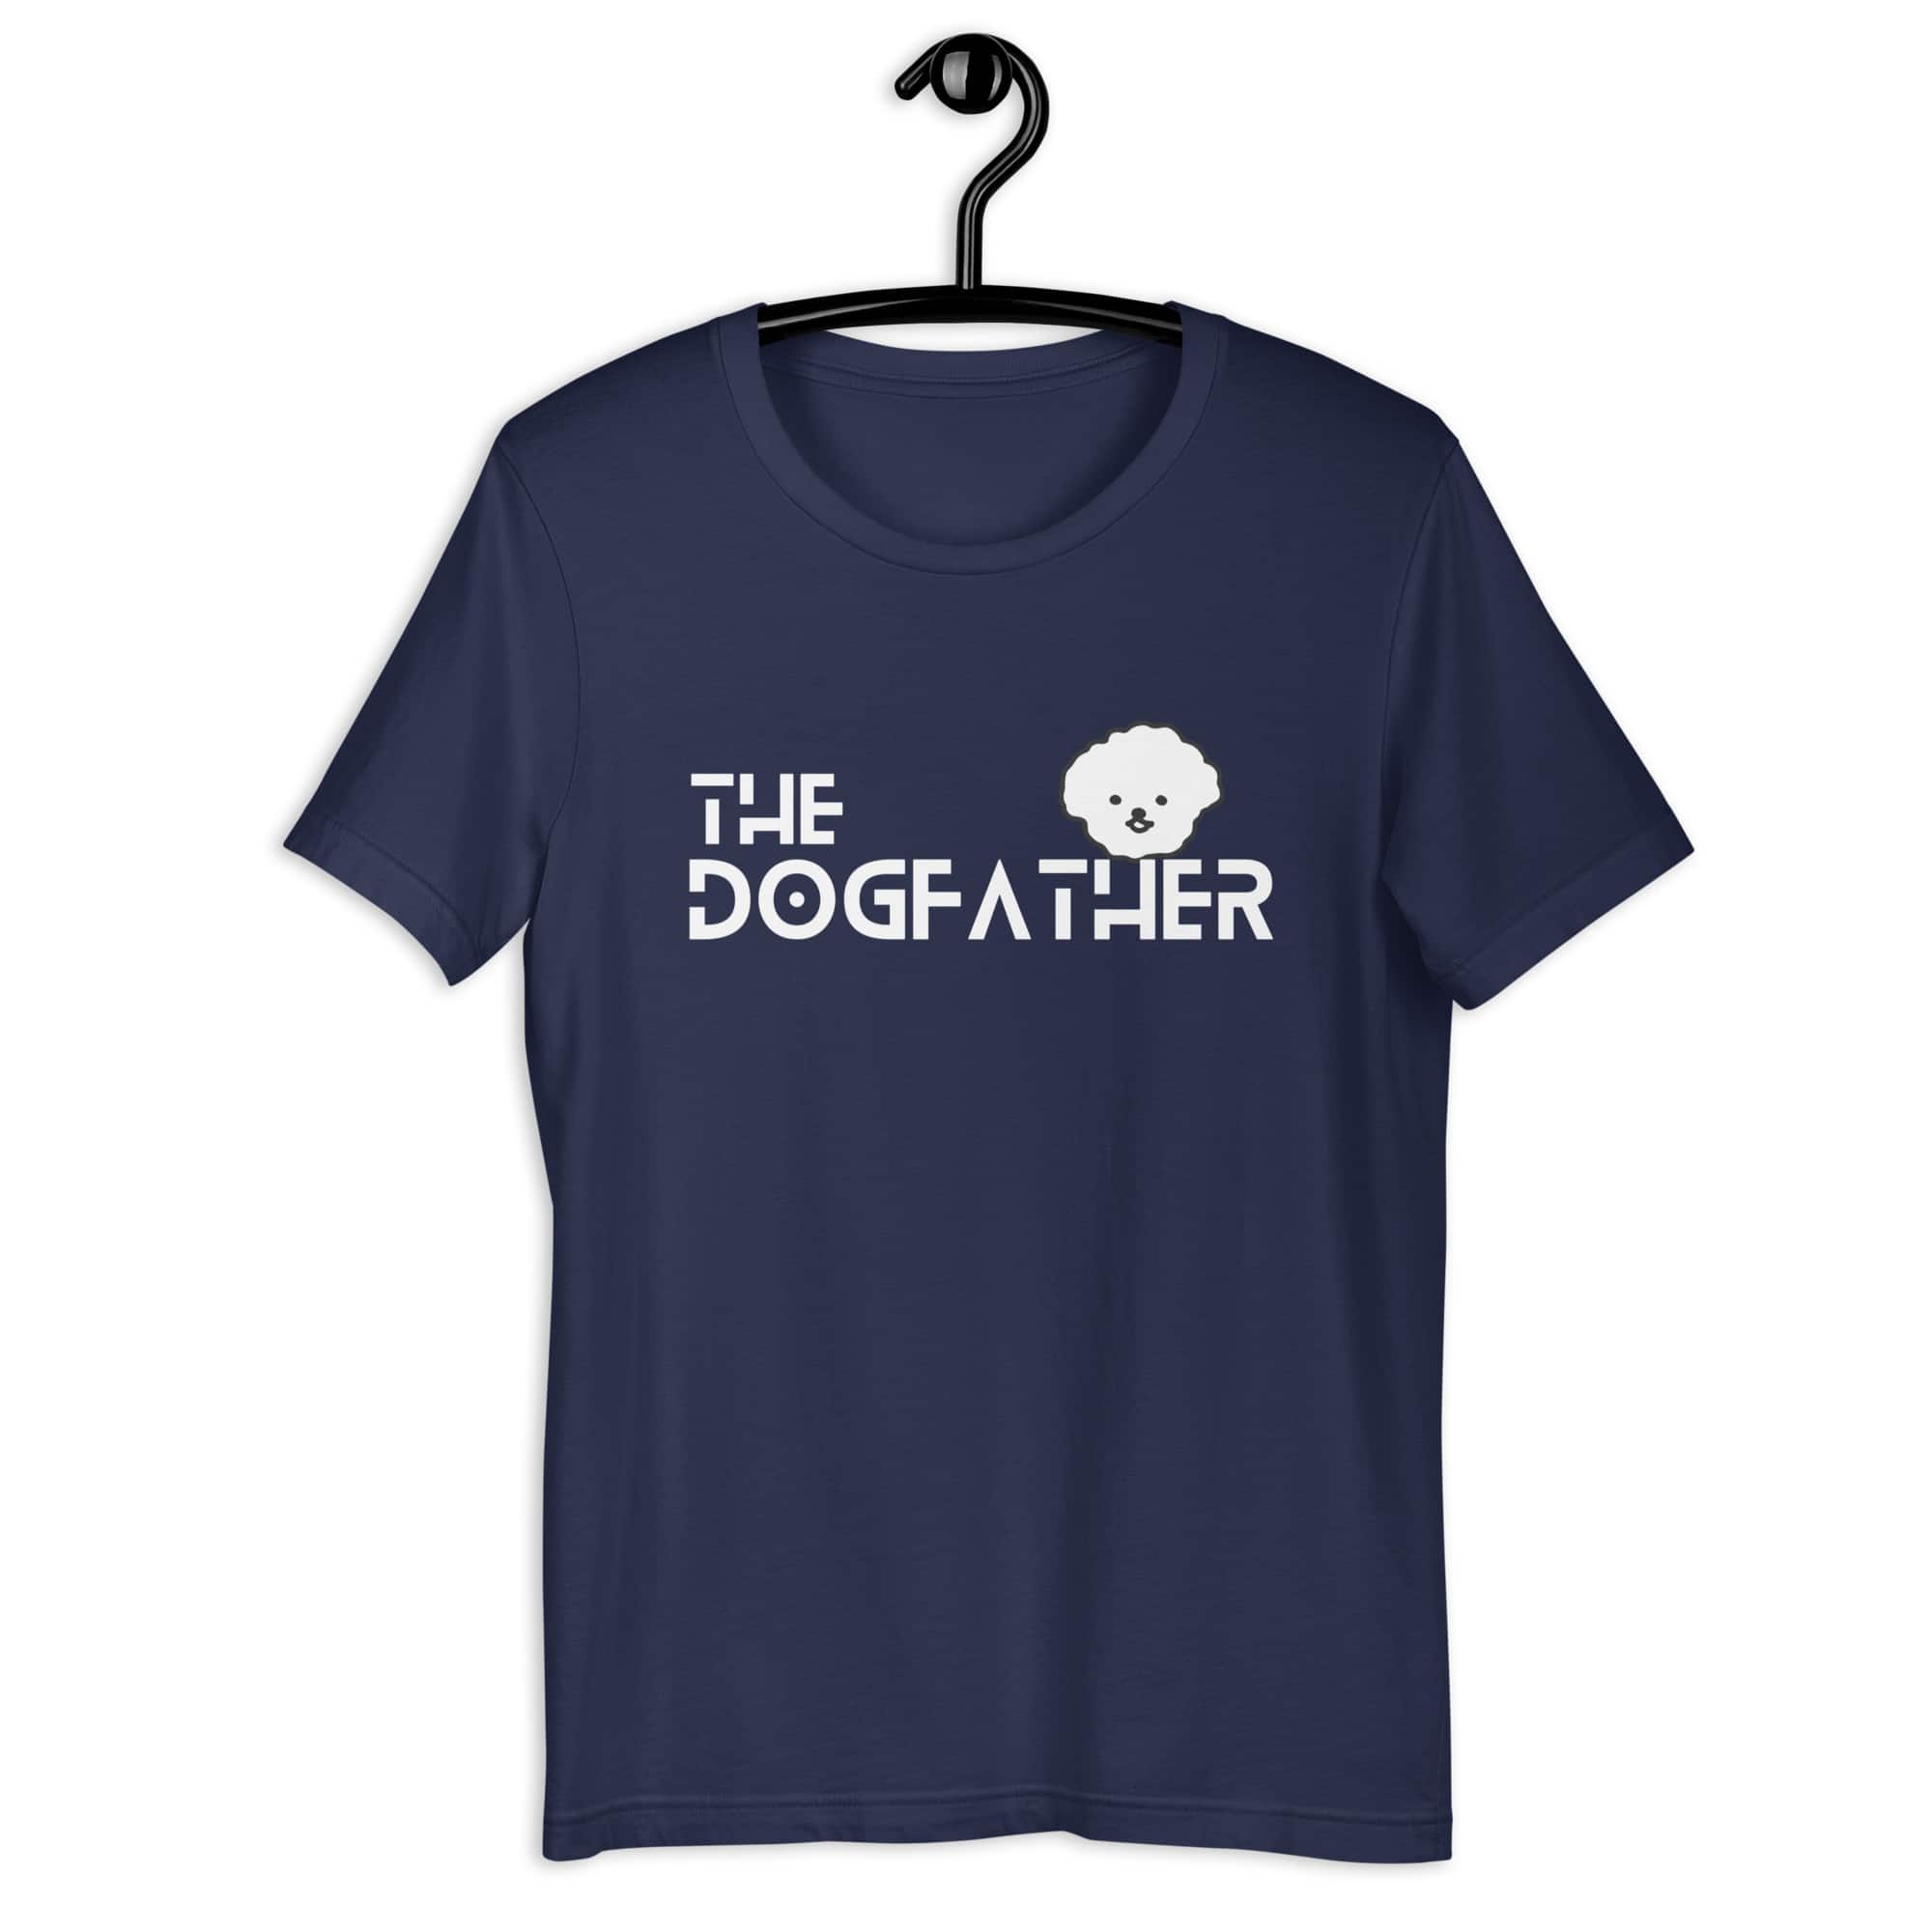 The Dogfather Poodles Unisex T-Shirt. Navy